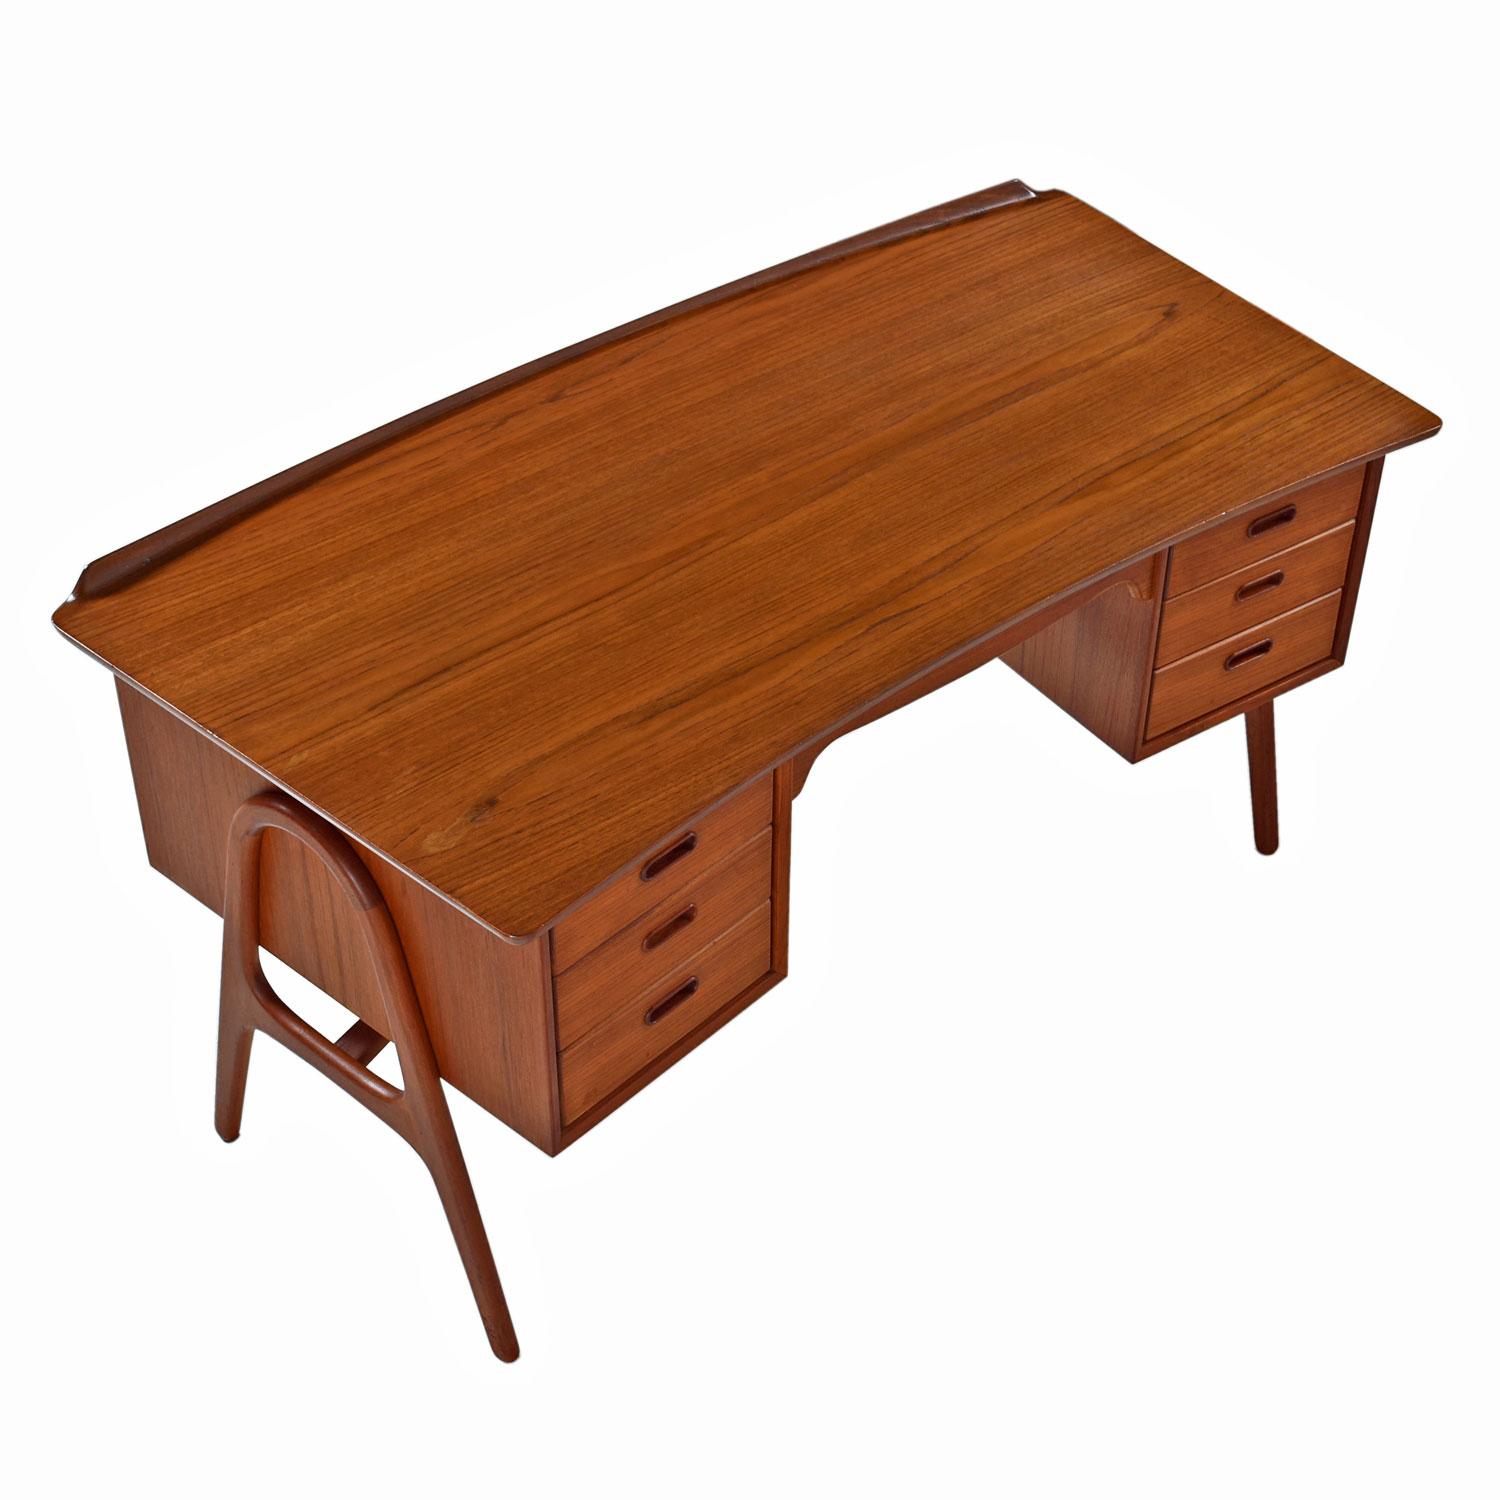 Teak desk imported by Moreddi, circa 1960. Moreddi worked with a variety of Danish designers and manufacturers to import and wholesale Danish design in the 1950s and 1960s. This desk was designed by Svend Madsen. 

Svend Aage Madsen designed this